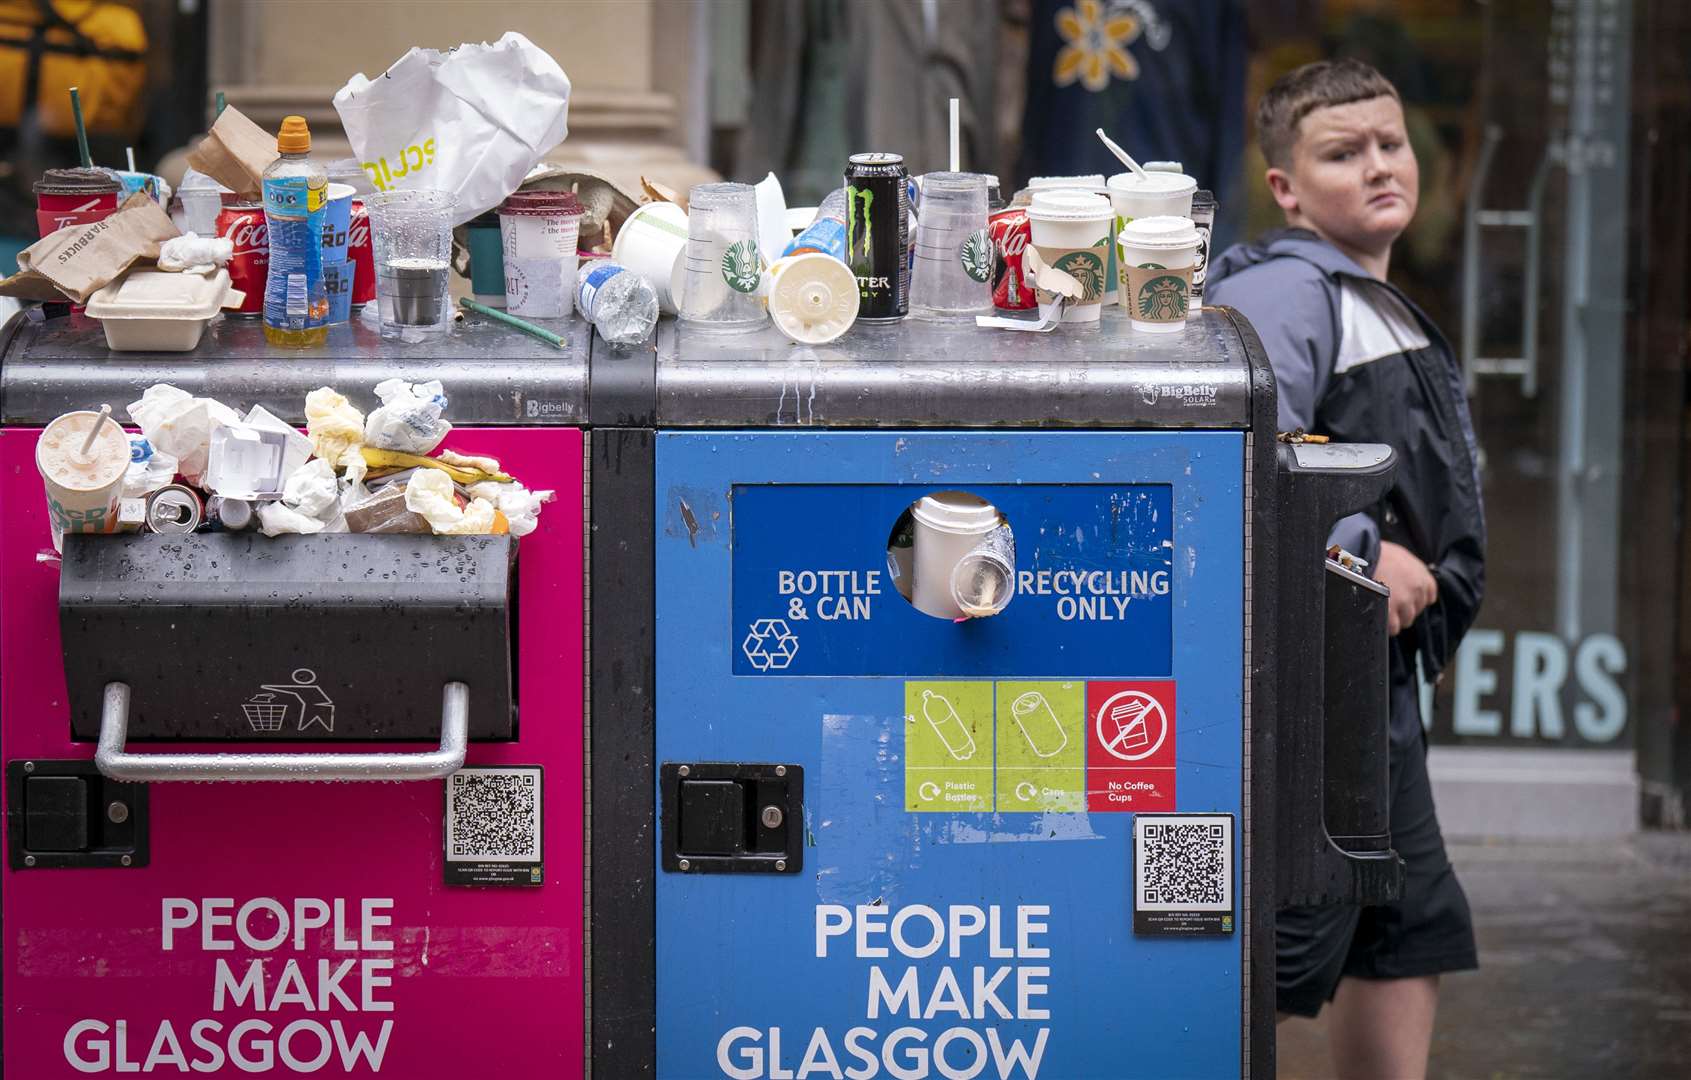 Bins in Glasgow are overflowing after the strike by council waste workers spread (PA)